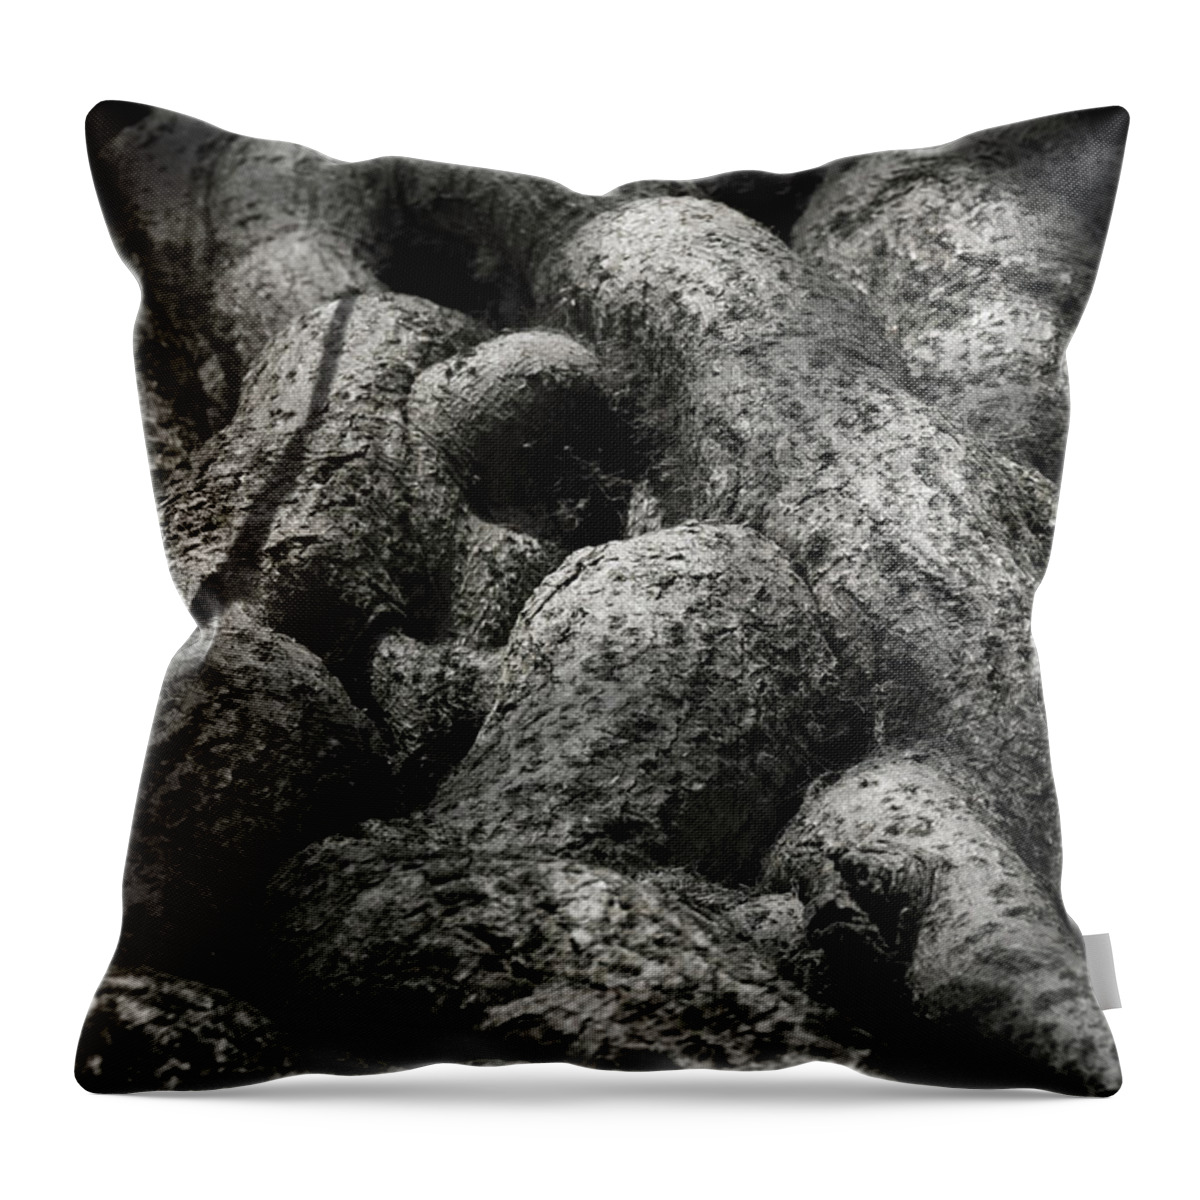 Intertwined Throw Pillow featuring the photograph Intertwined by Wim Lanclus